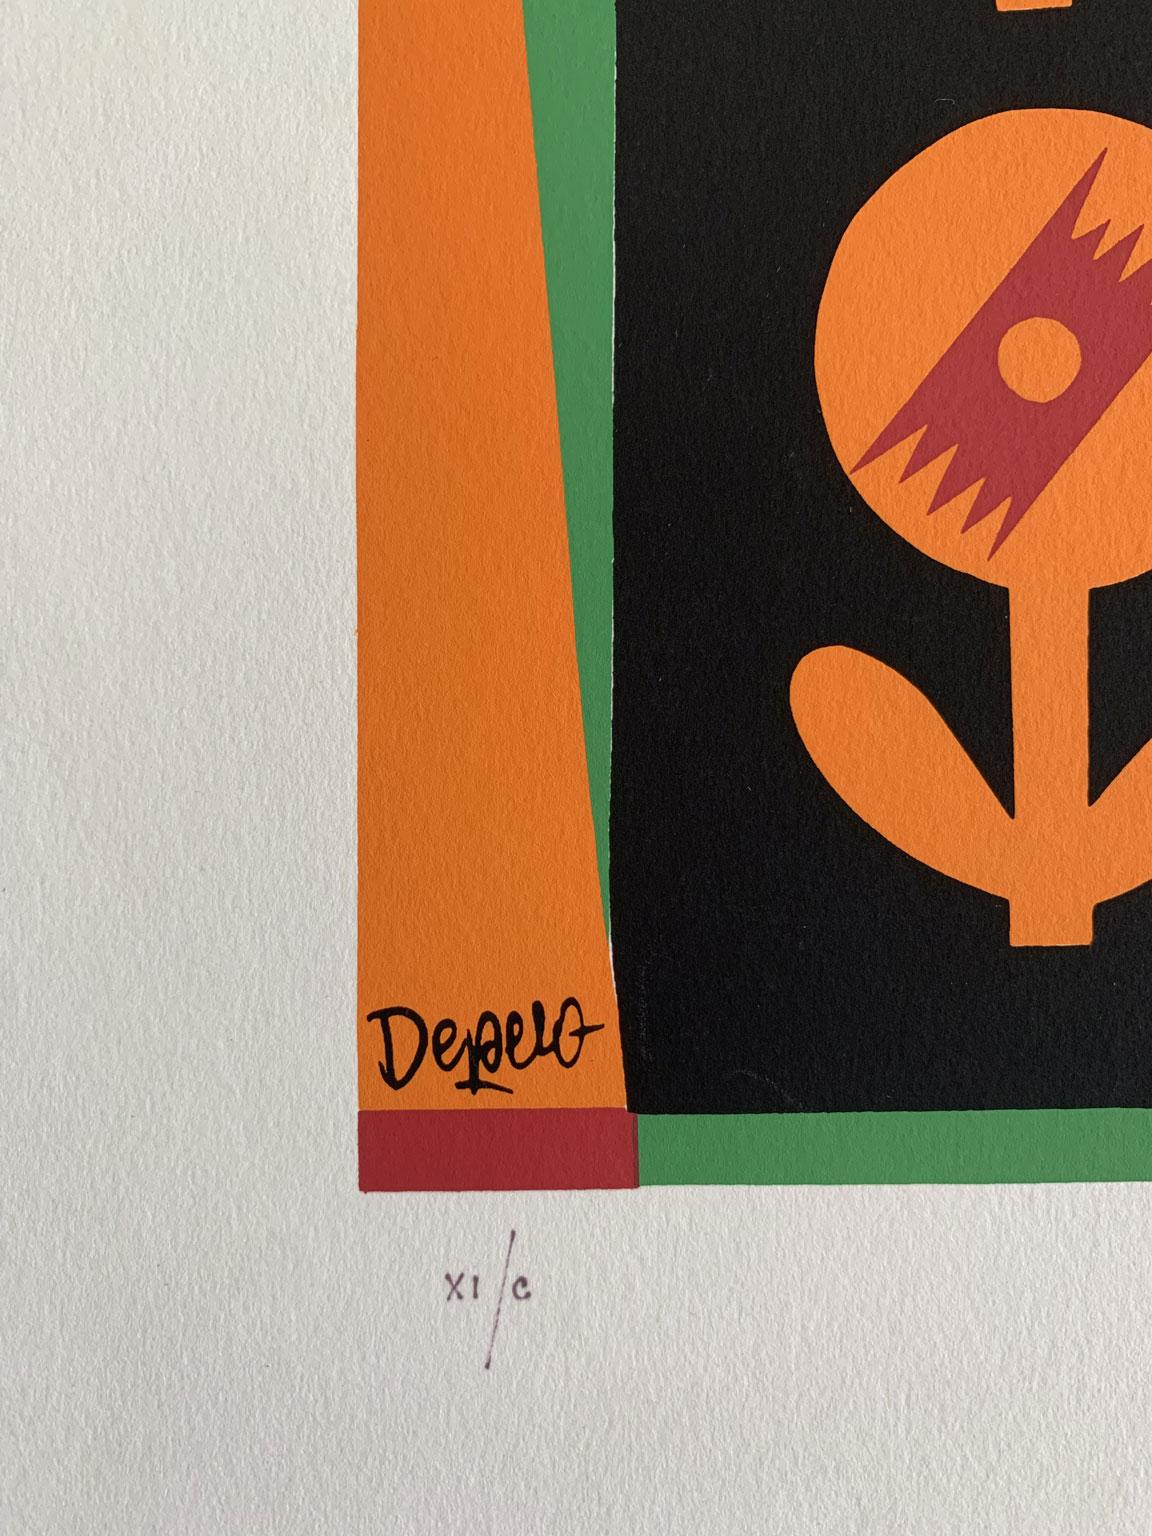 This Fortunato Depero wonderful print on paper is a multiple of 250 printed by the authorization of Museum of Depero in Rovereto. This is number XI (eleven).

Fortunato Depero was a well known Master of the Italian Futurism.
The full colors have a